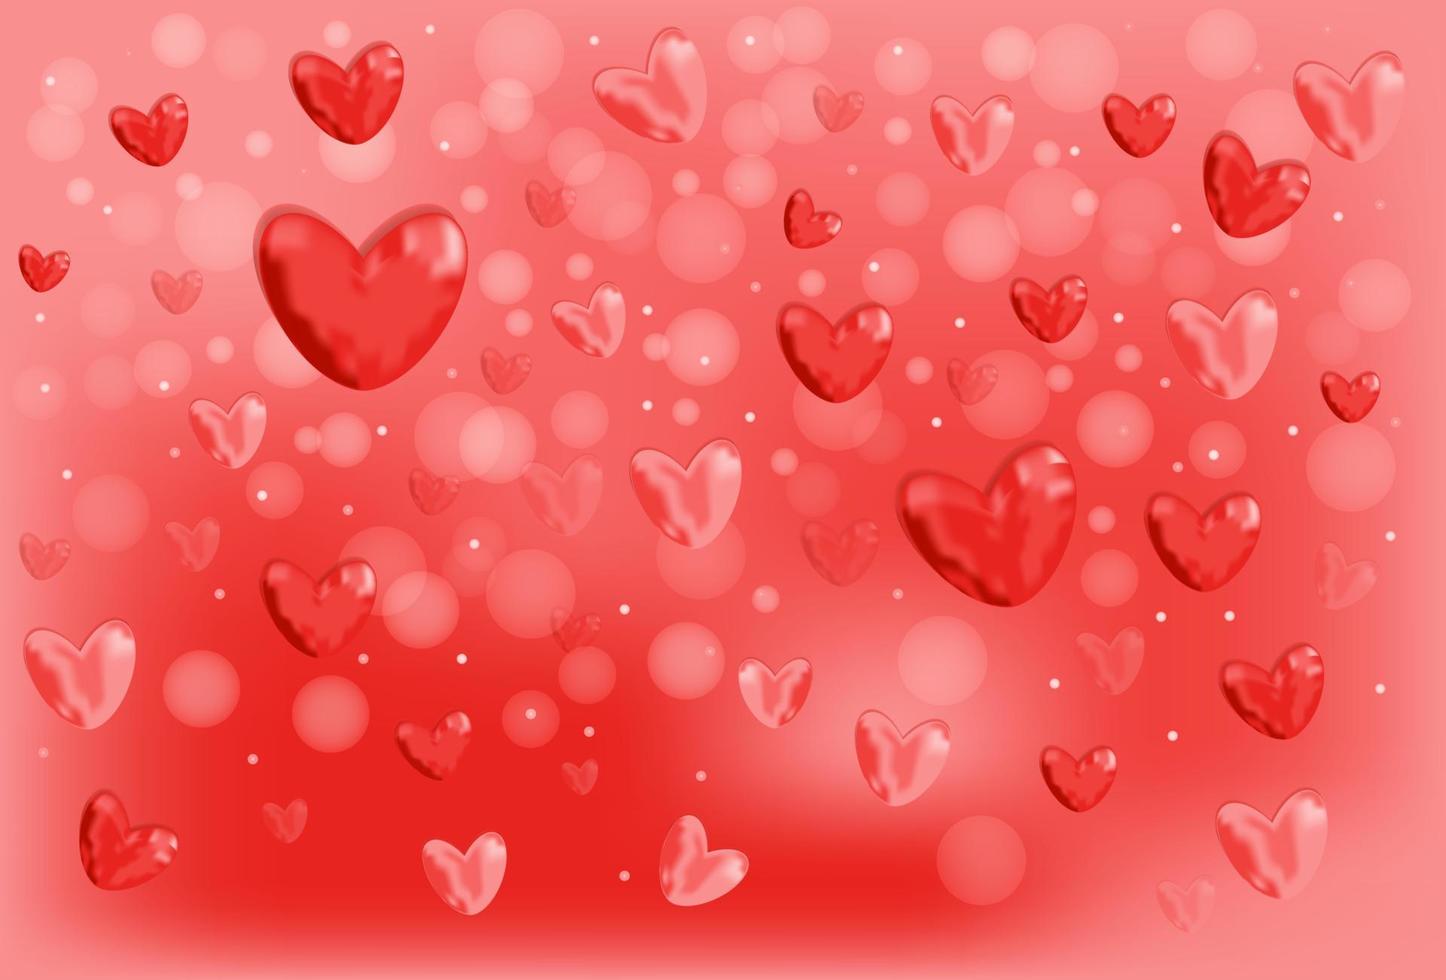 happy valentine's day with blur background. love illustration vector